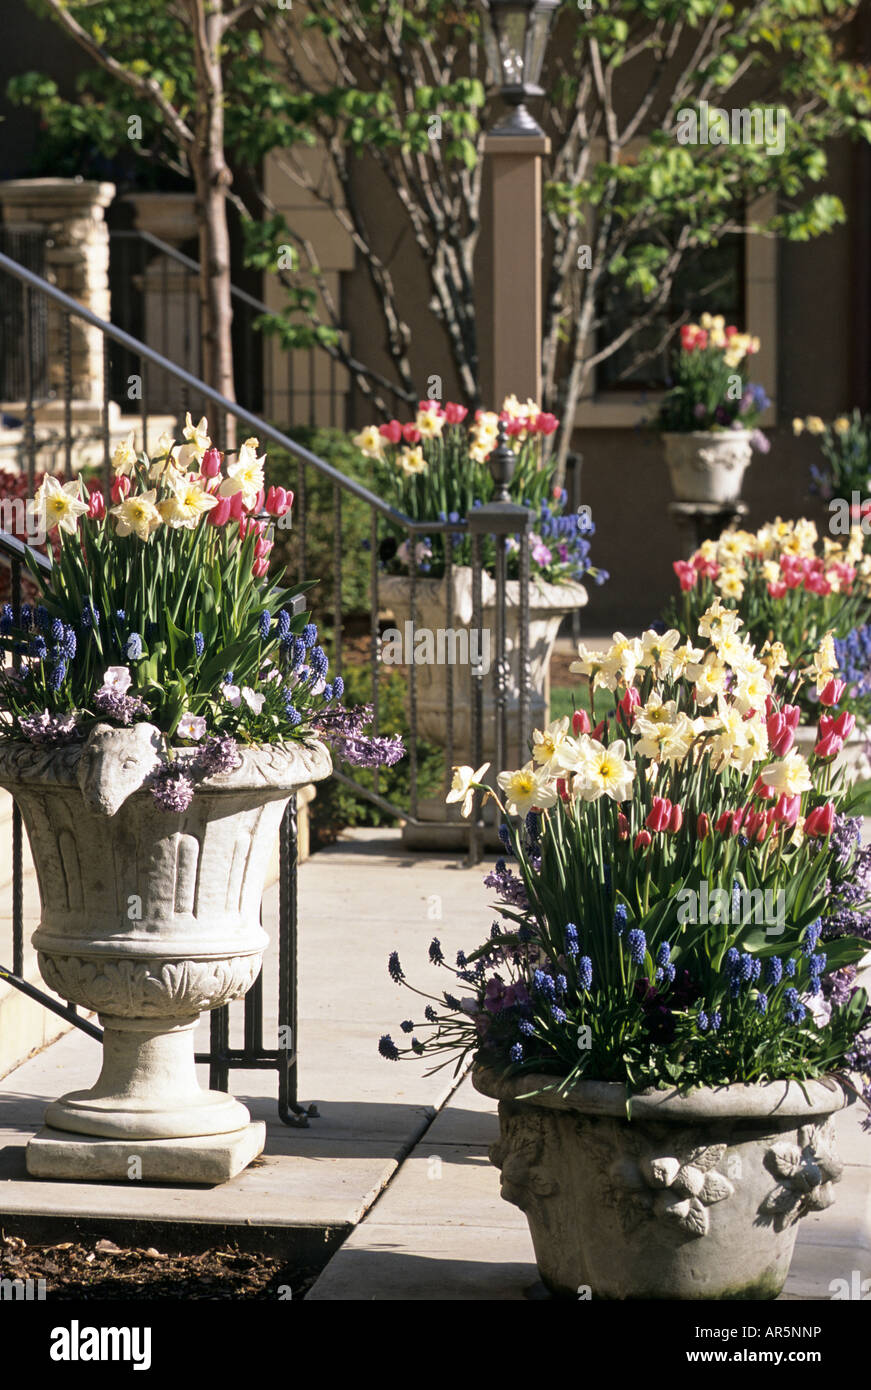 POTS OF TULIPS, DAFFODILS, GRAPE HYACINTHS, PANSIES AND MUSCARI ON PORCH OF MINNESOTA HOME.  MAY. Stock Photo